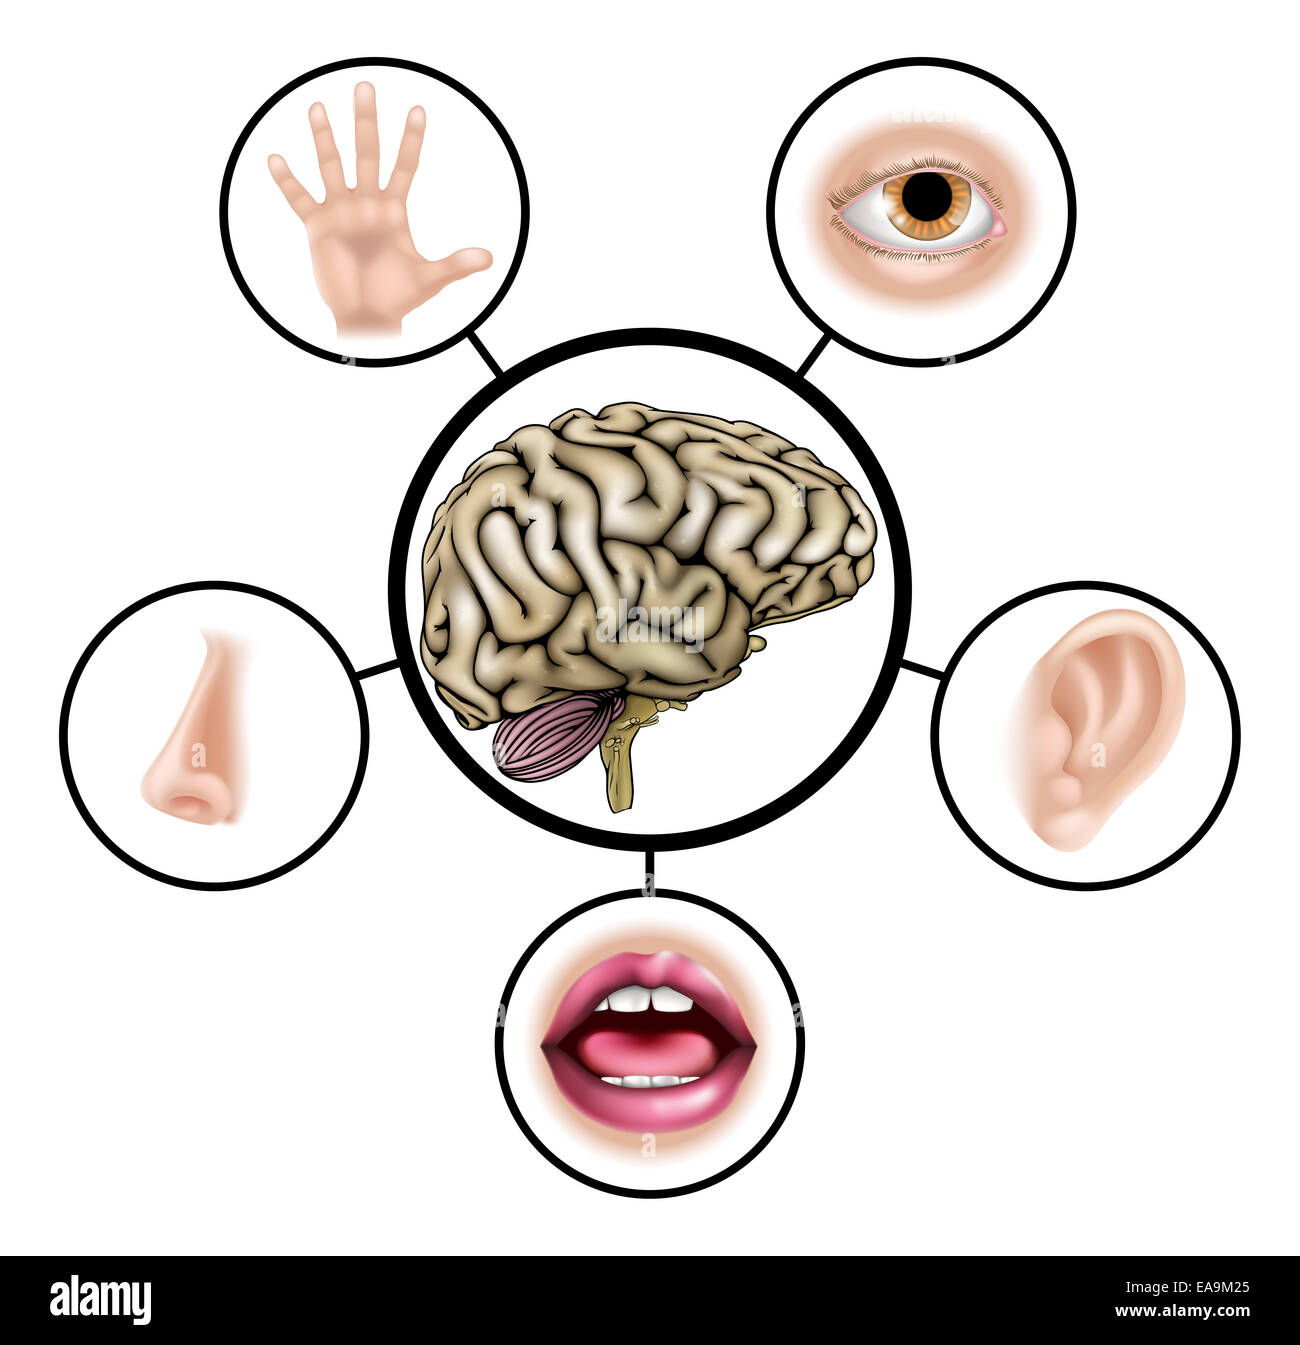 A science education illustration of icons representing the five senses attached to central brain Stock Photo